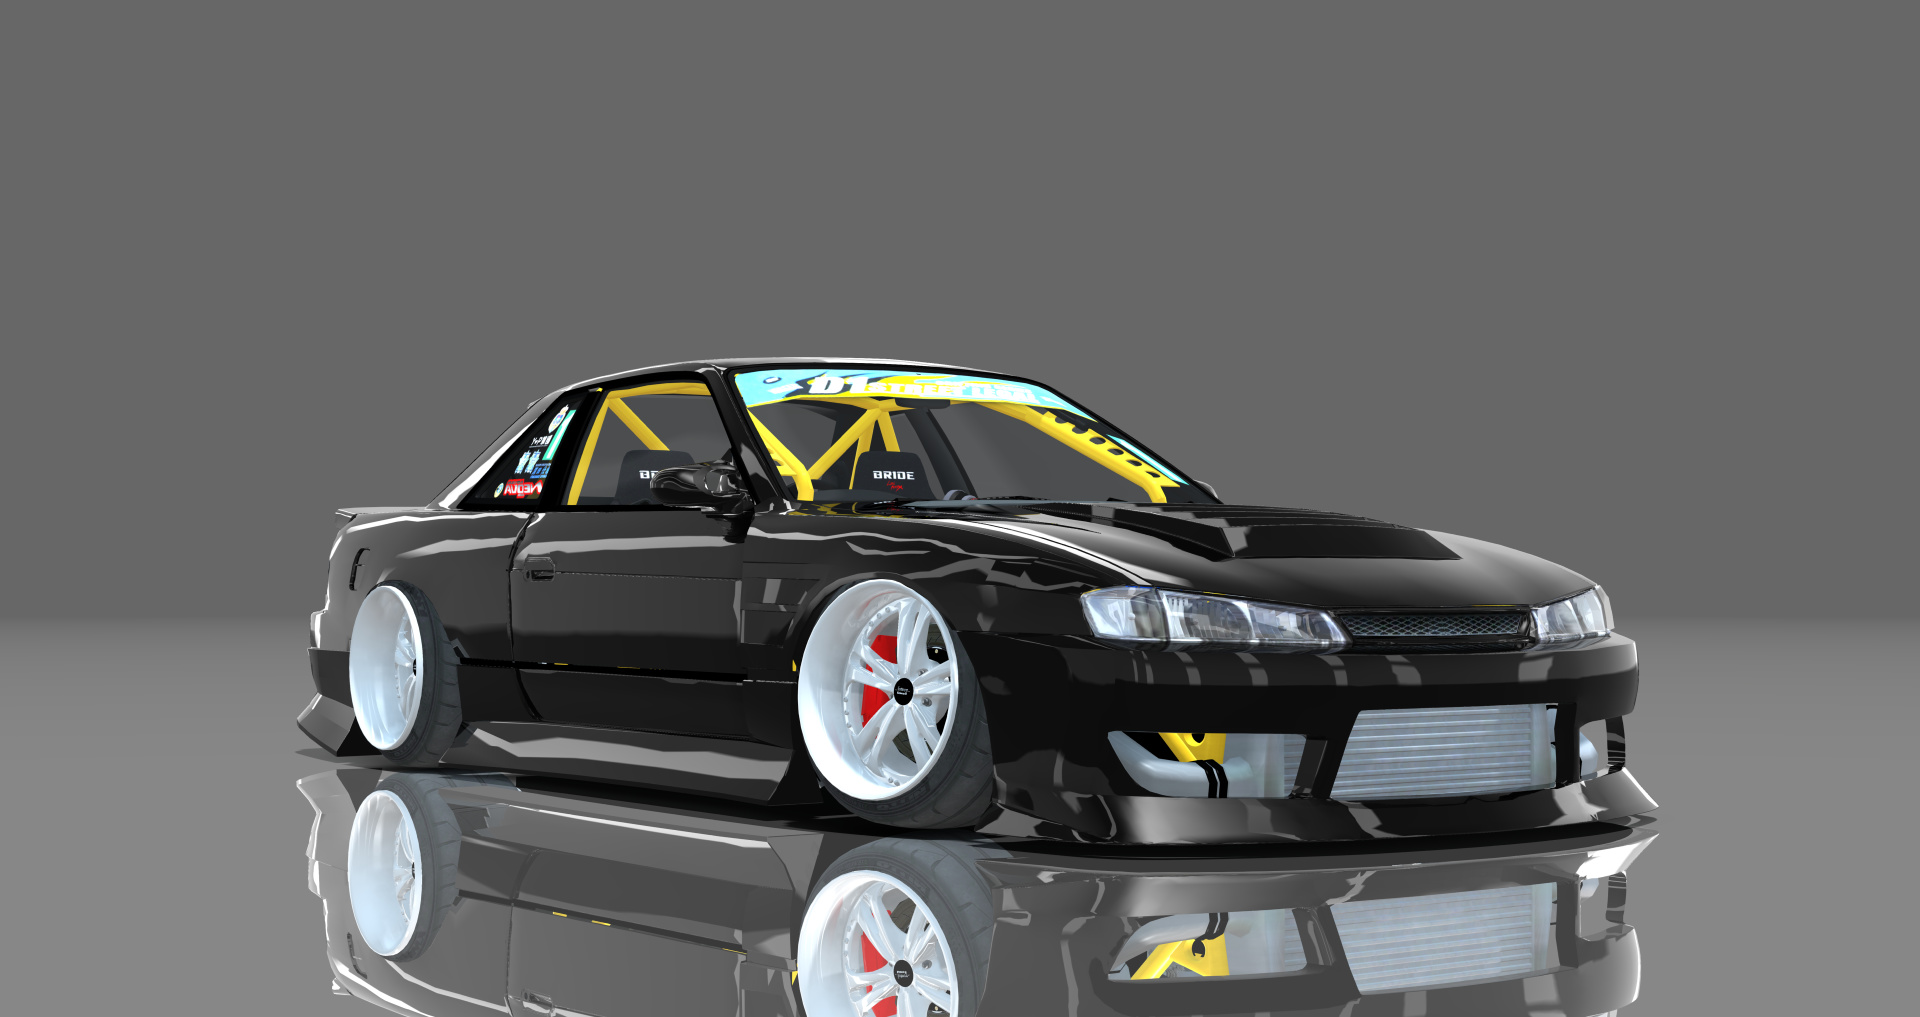 DTP Nissan Silvia S13.4 Preview Image